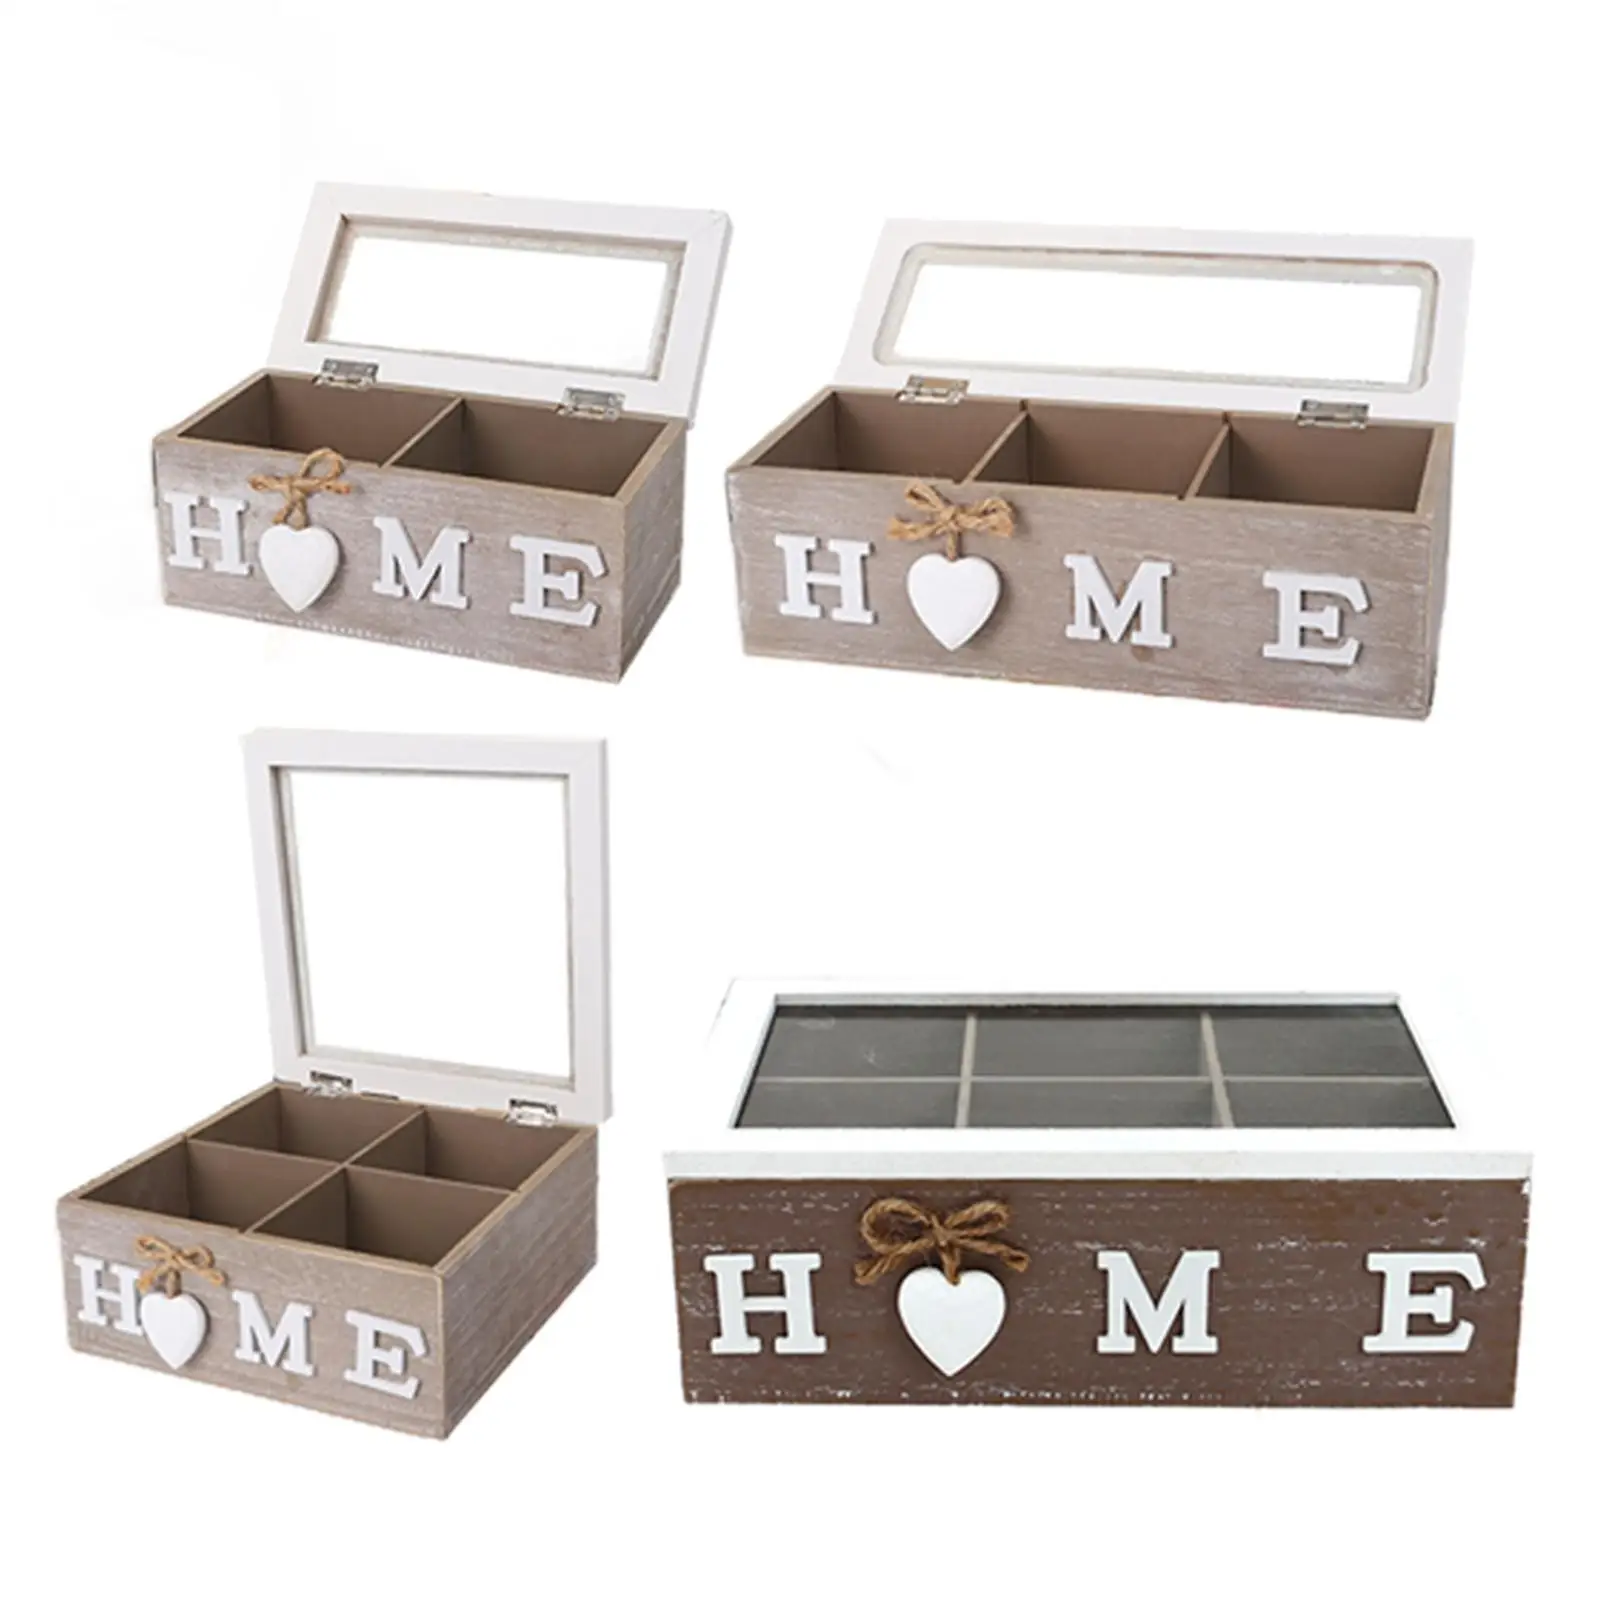 Wooden Tea Storage Box Stackable Tea Bag Holder and Viewing Window for Sugar